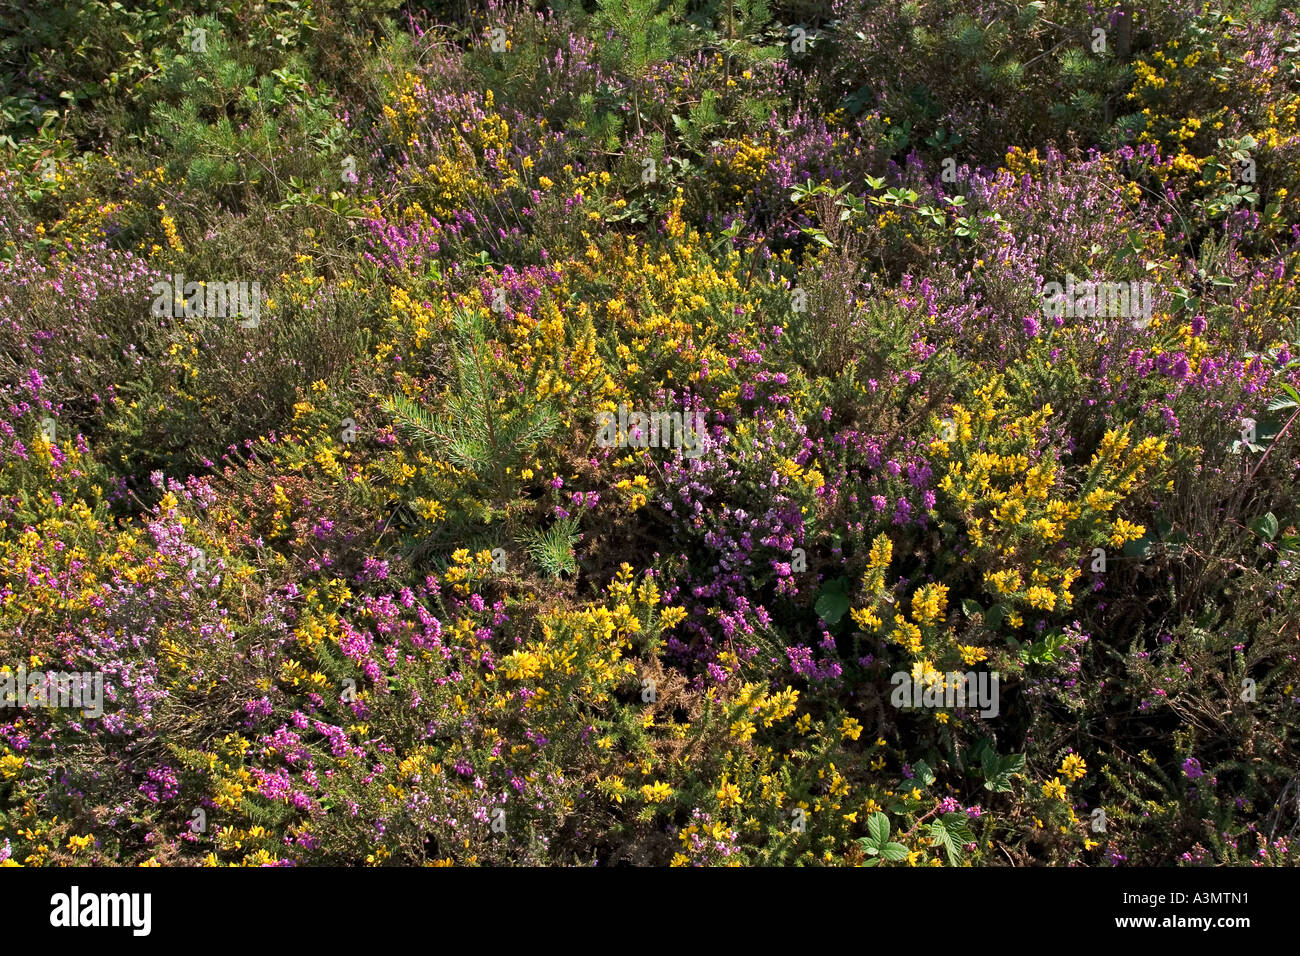 Restored heathland of former gravel pit with gorse, broom, heathers and conifers Stock Photo